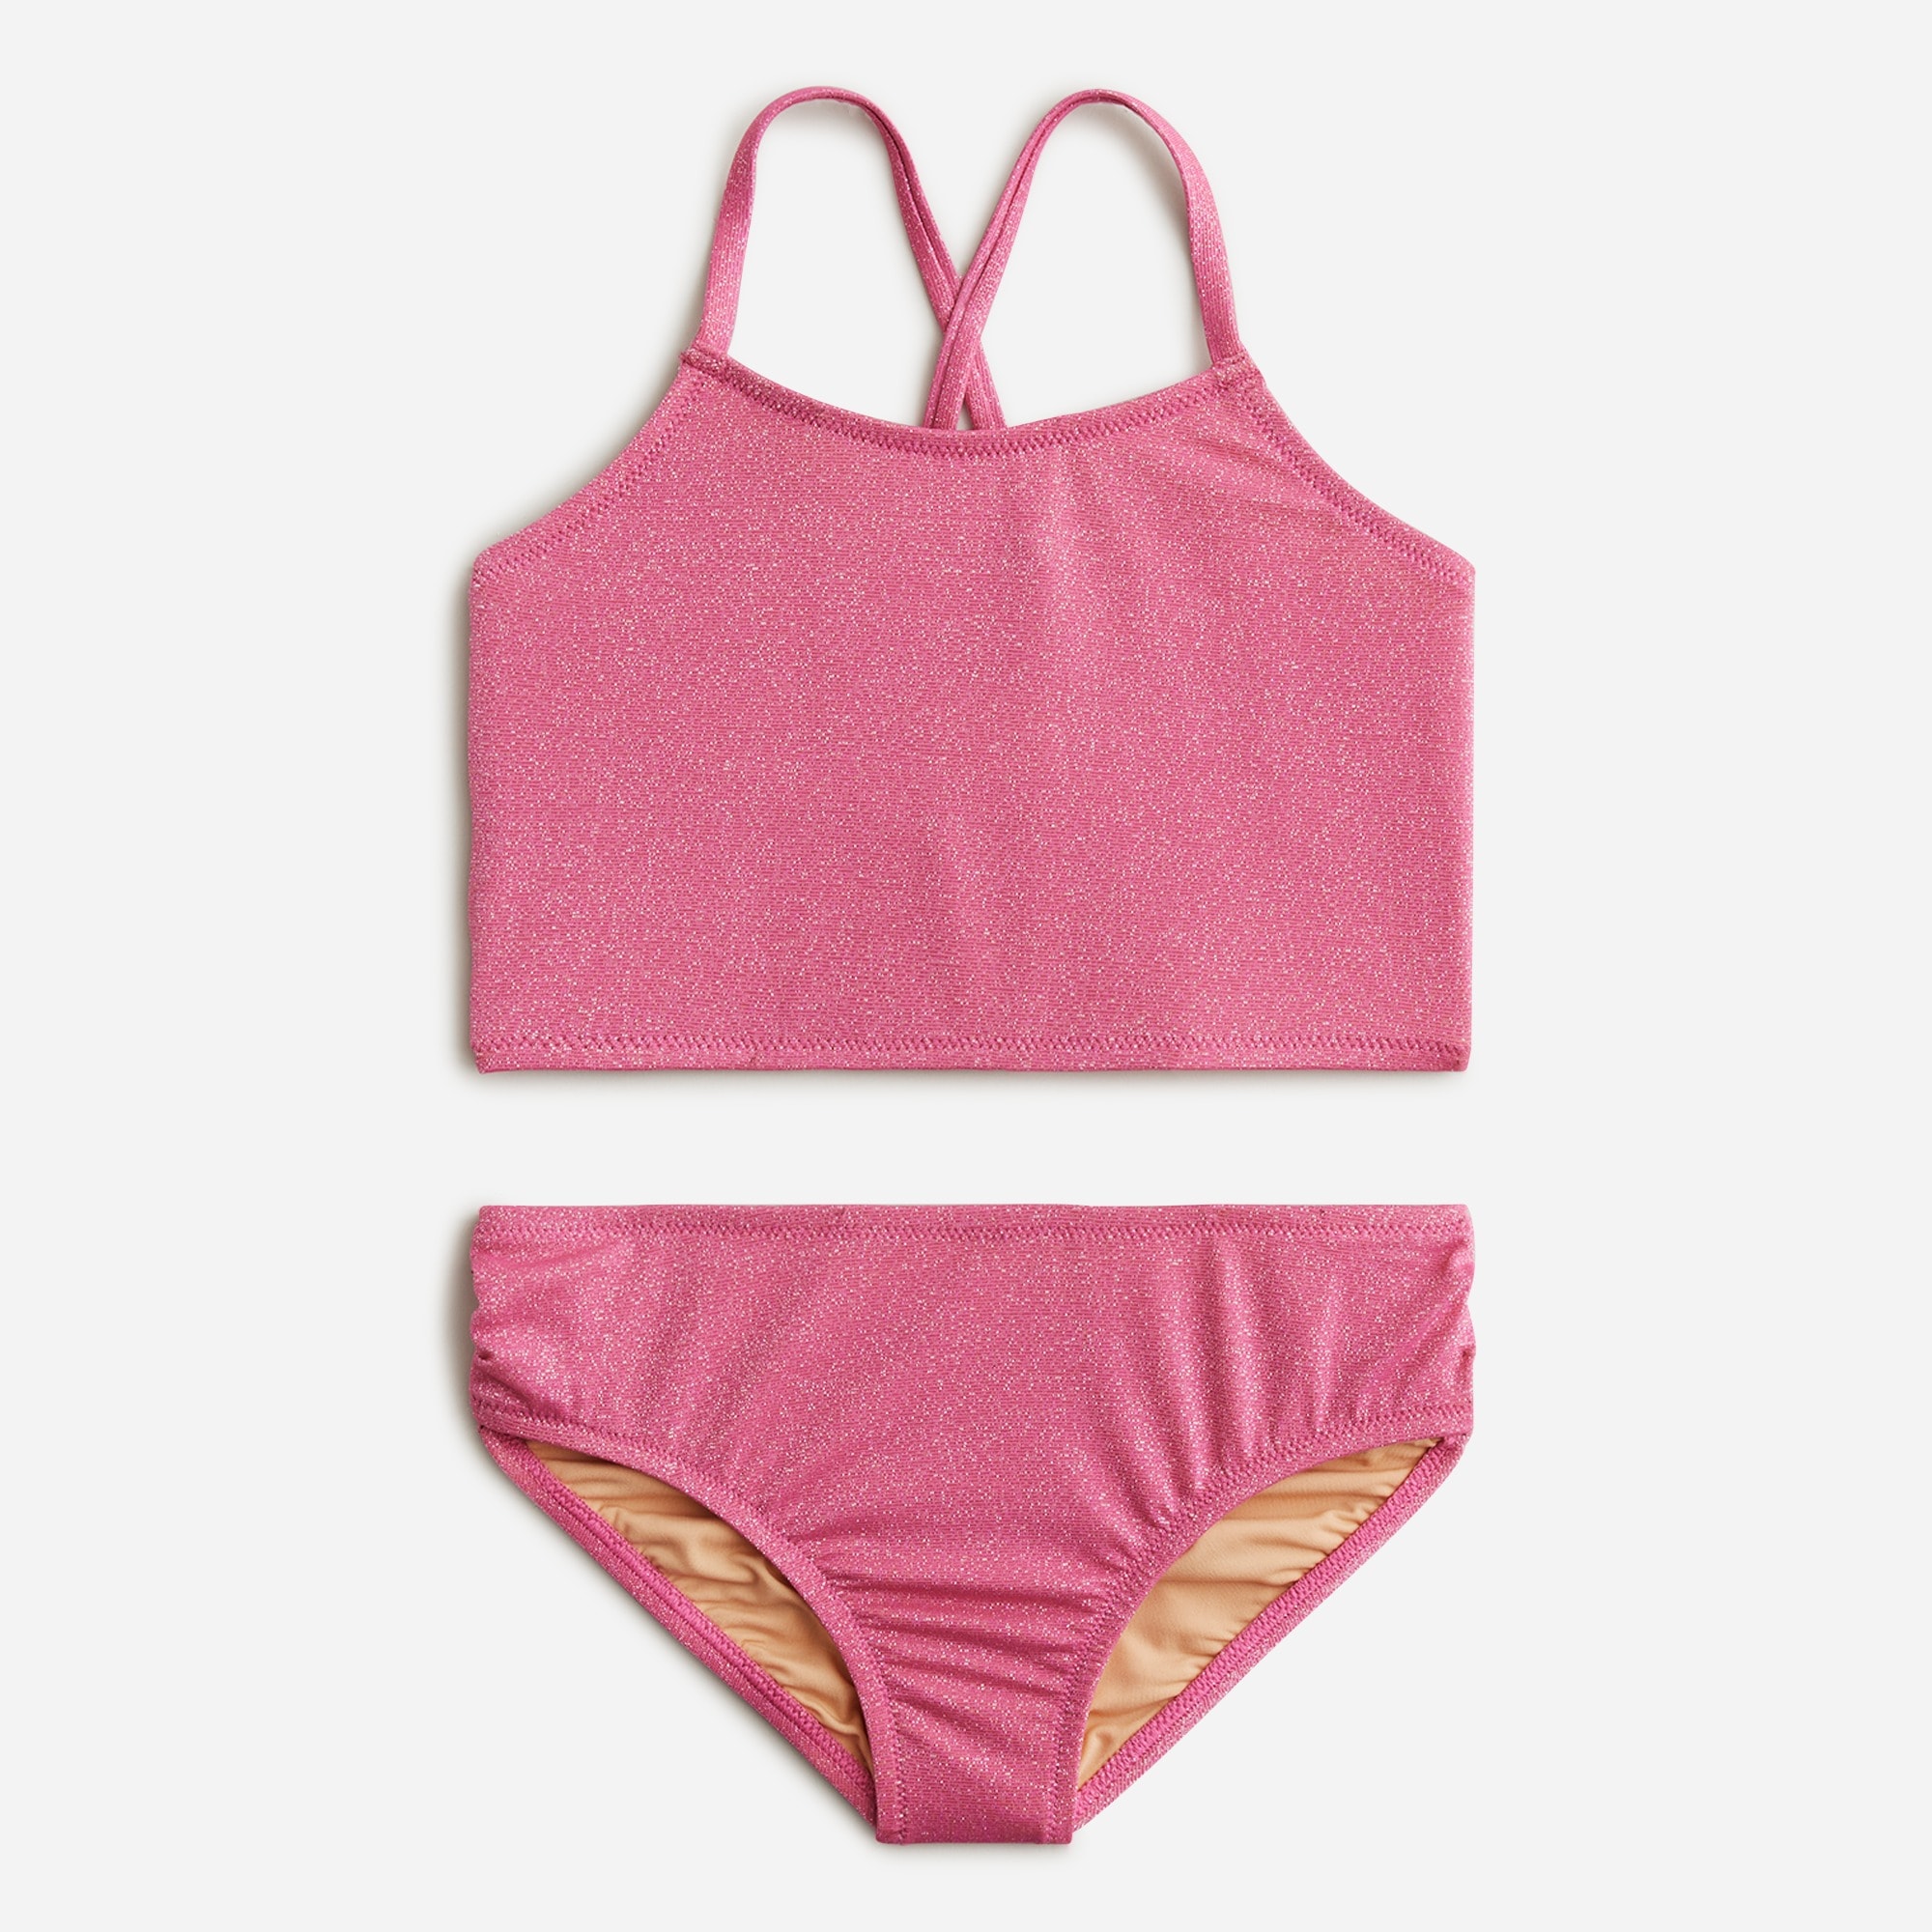  Girls' shimmer two-piece swimsuit with UPF 50+